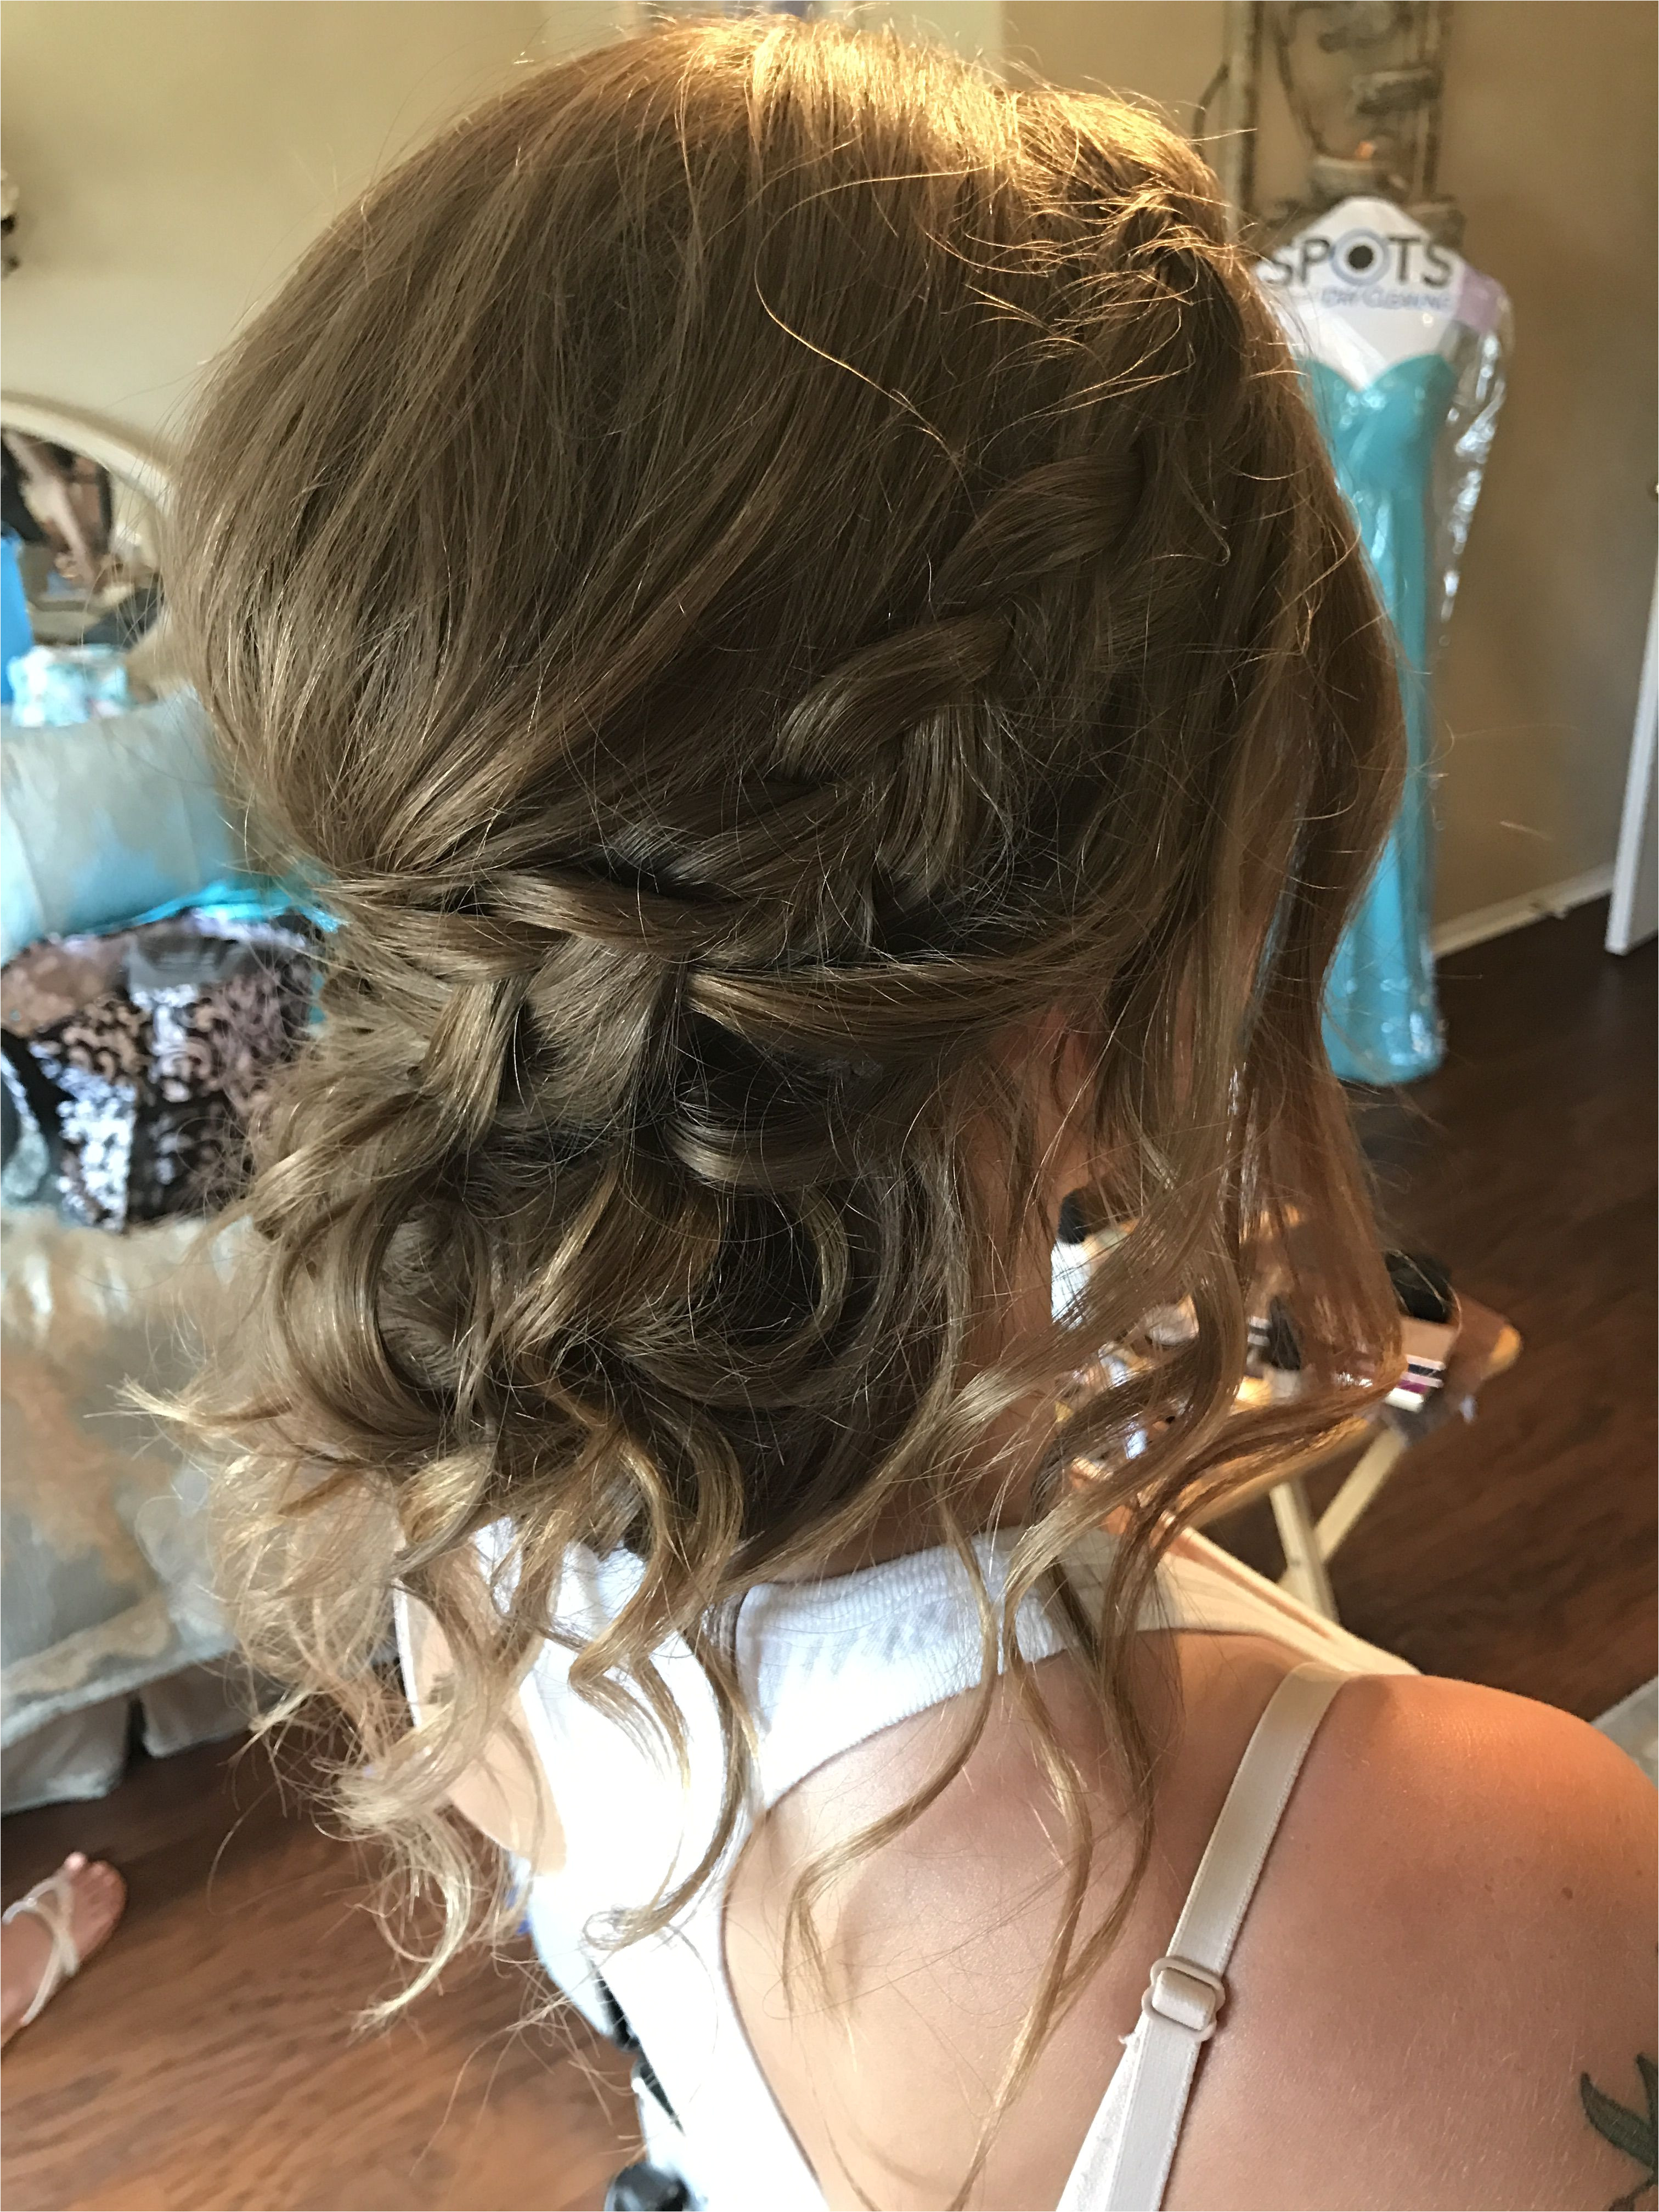 Loose curls updo hairstyle braided hair